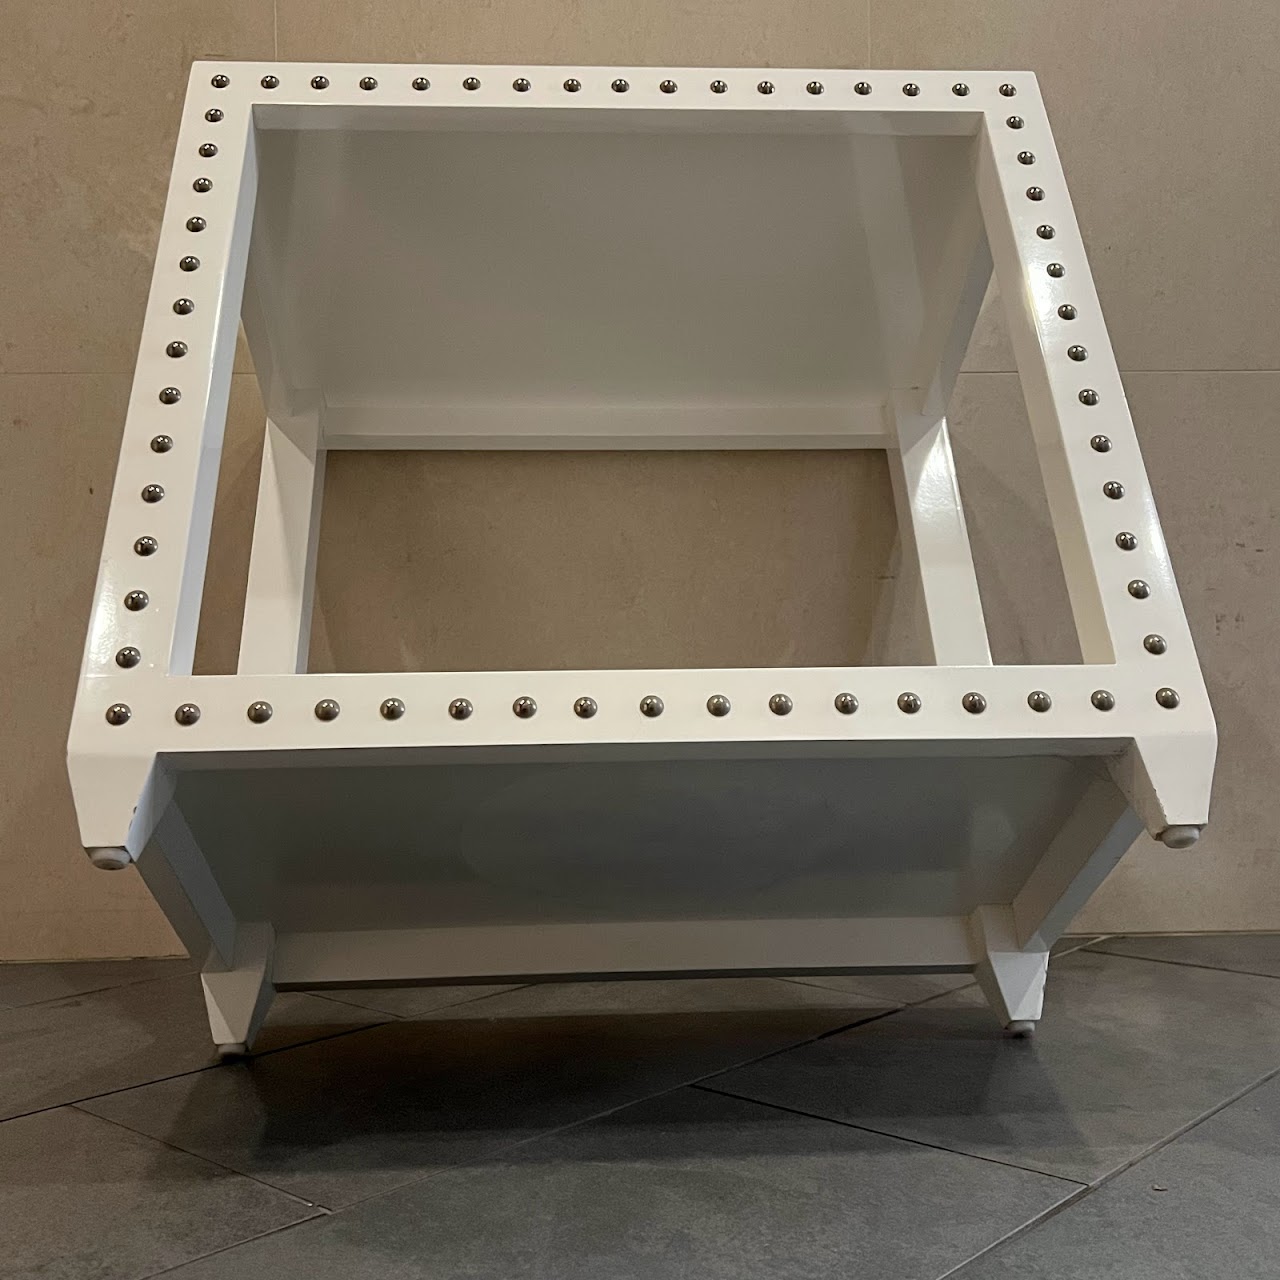 Studded Lacquer Mirror-Top Side Table #1